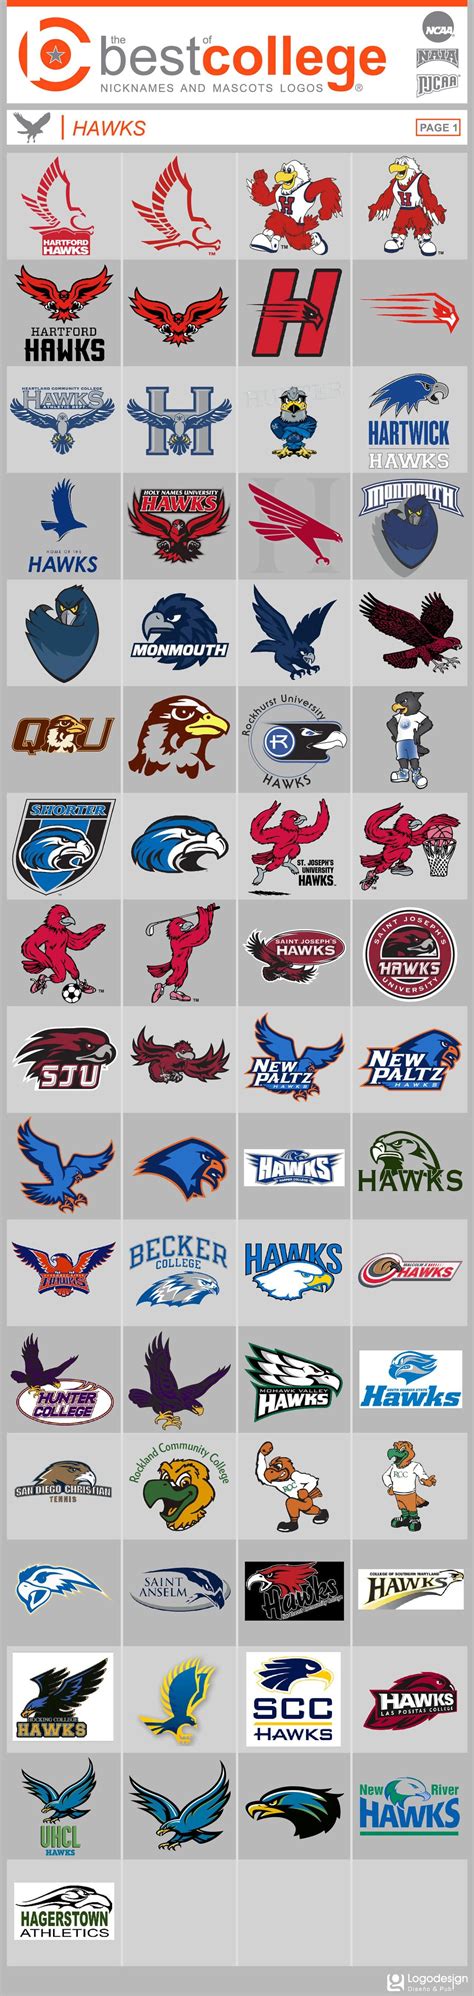 The Best Of College Nicknames And Mascots Logos Personal Logo Design